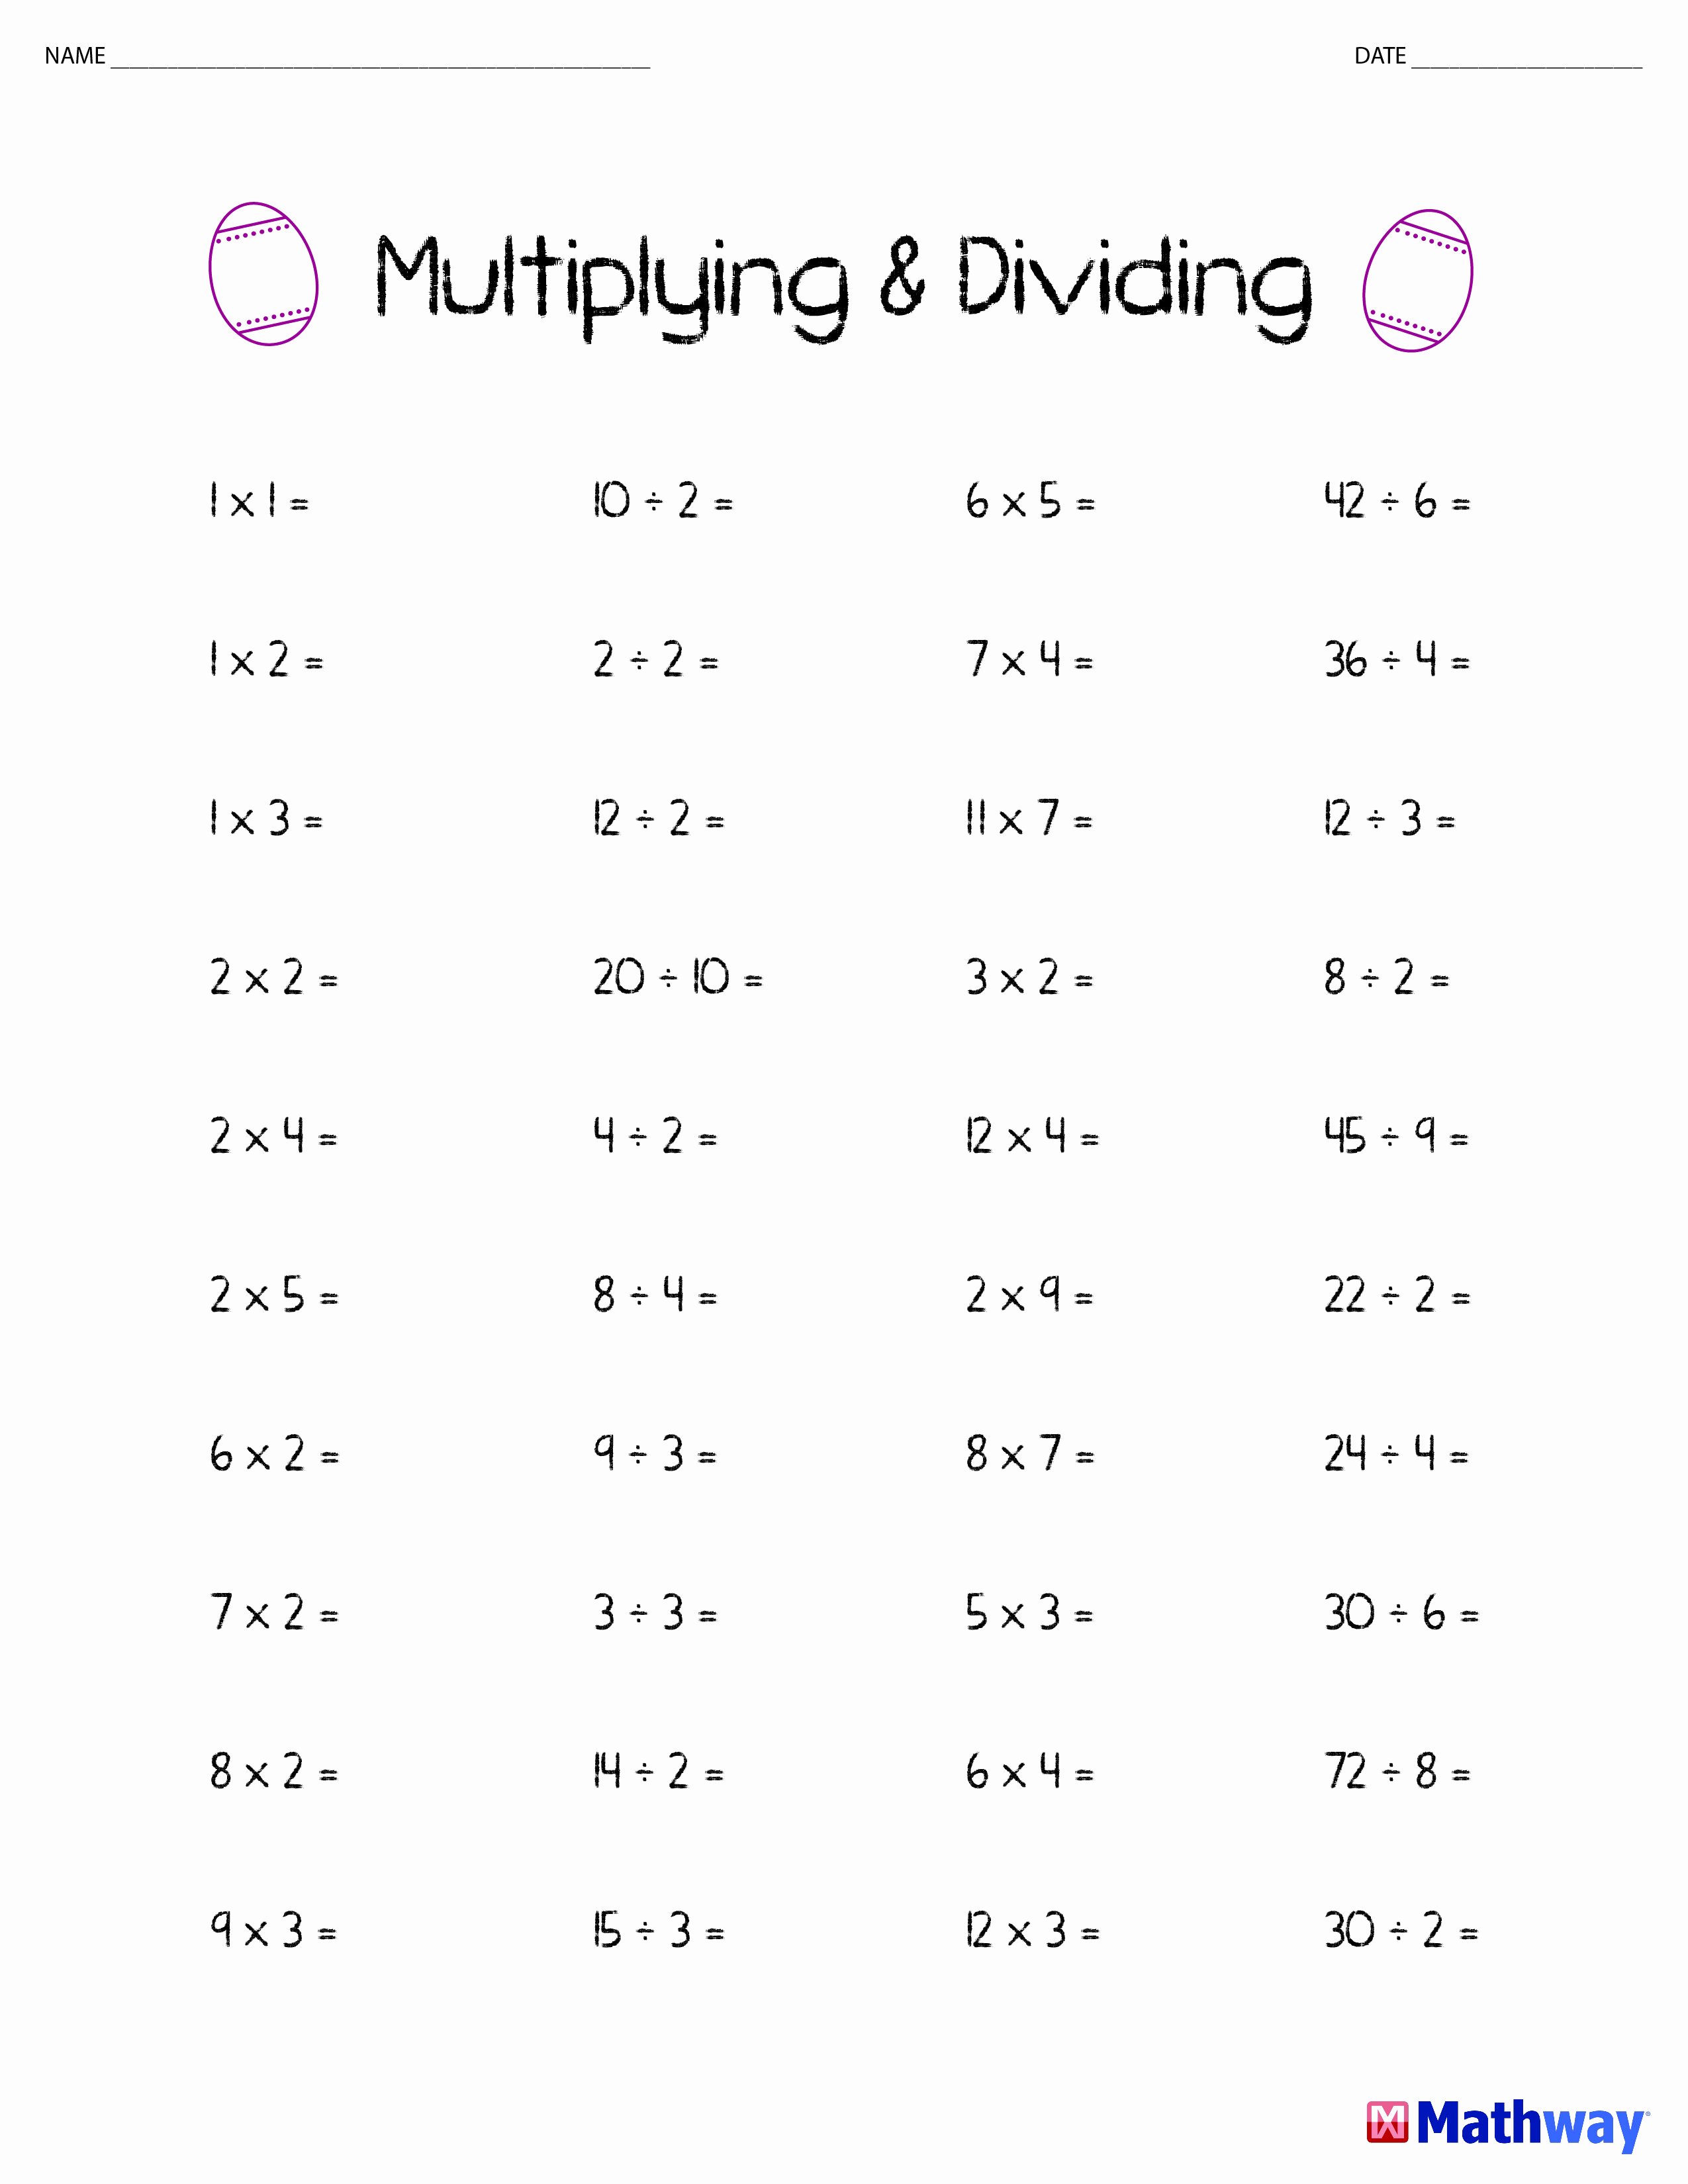 Print Out Algebra Worksheets Lovely Need some Additionl Practice with Multiplying and Dividing